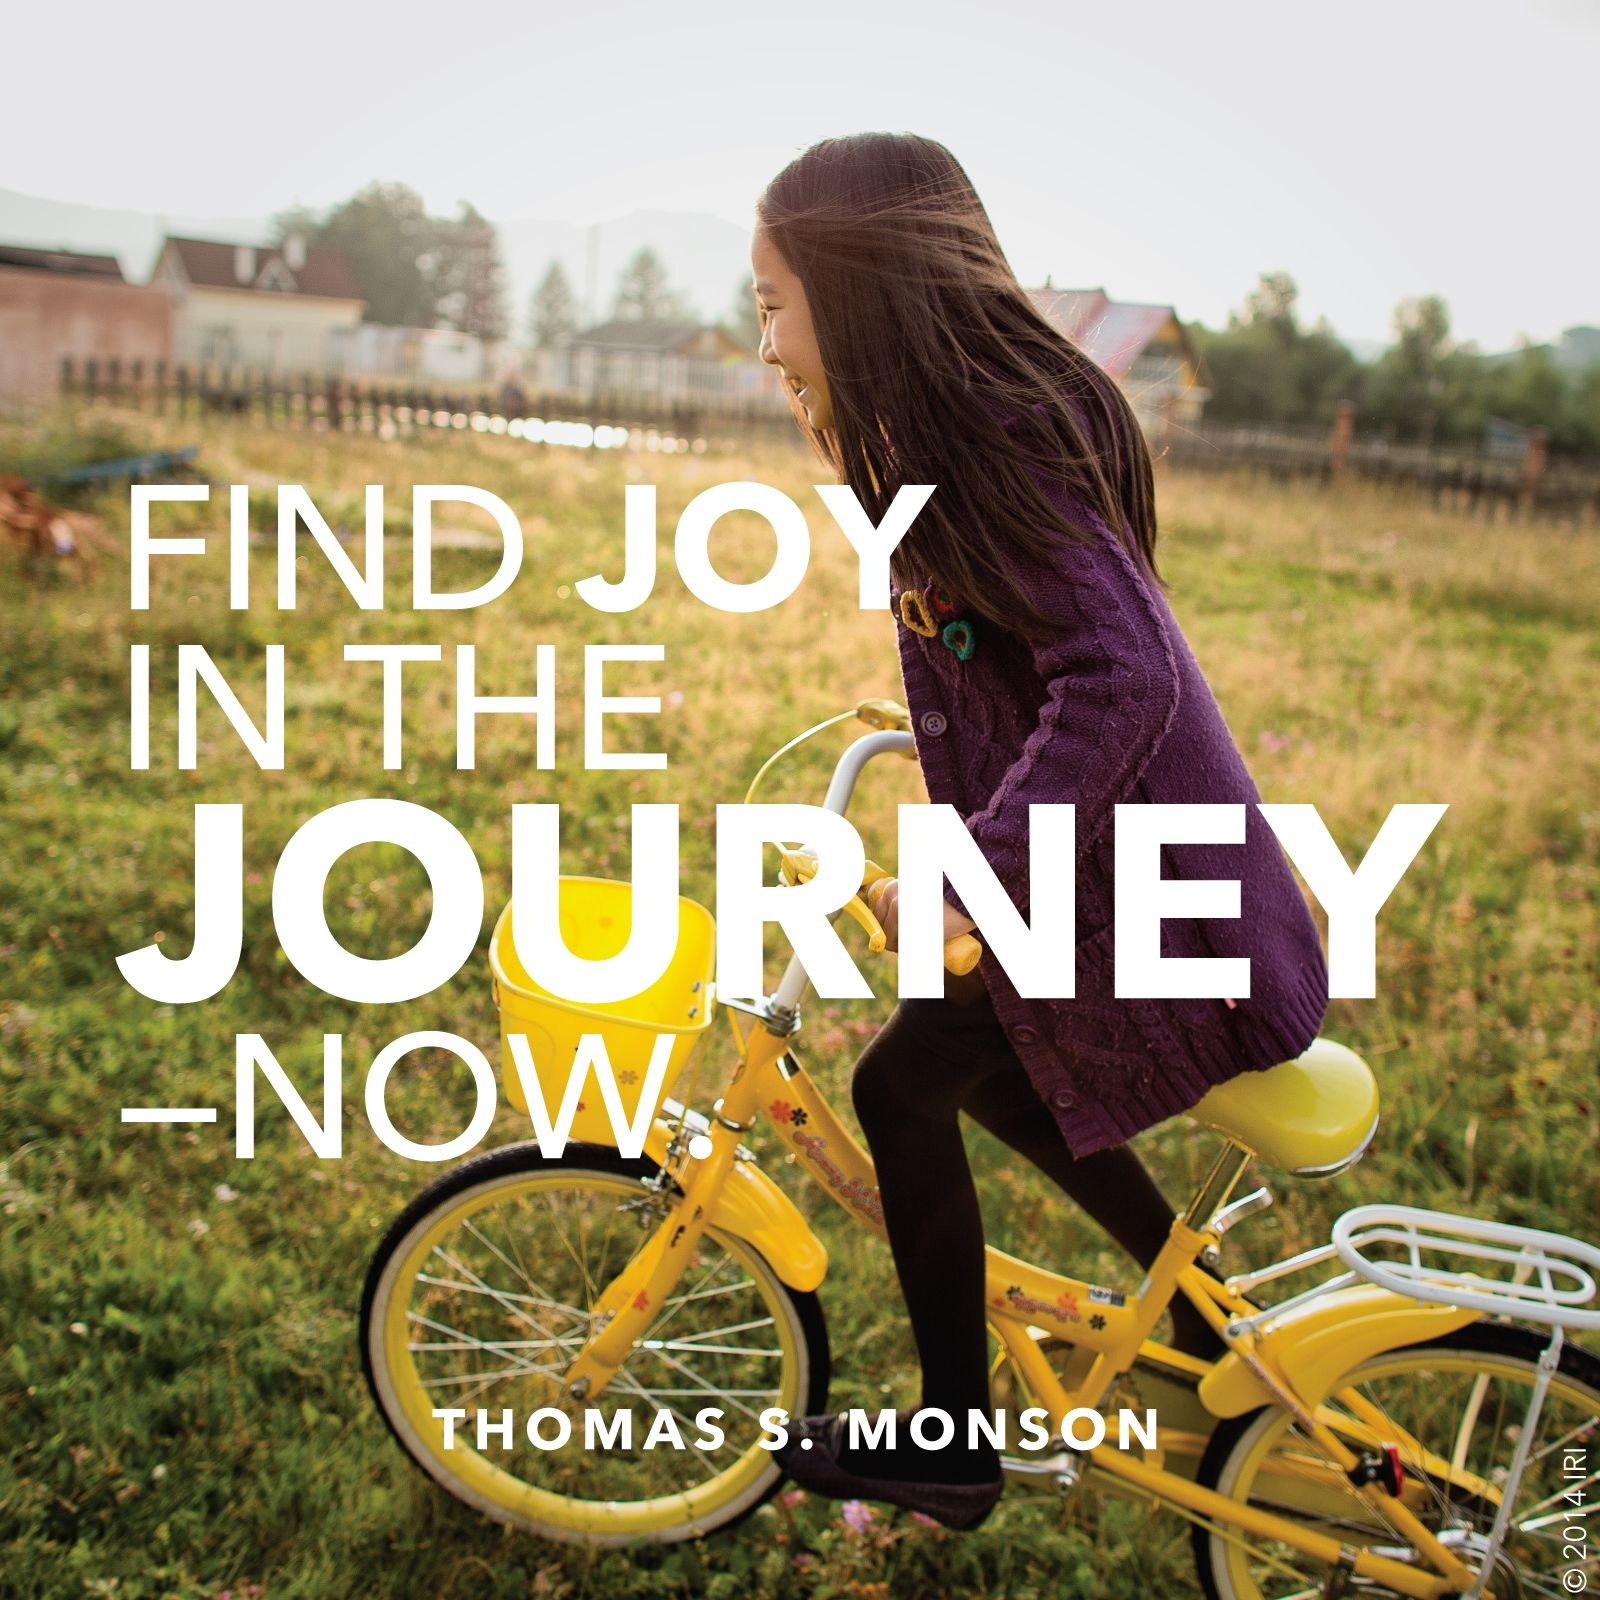 “Find joy in the journey—now.”—President Thomas S. Monson, “Finding Joy in the Journey”